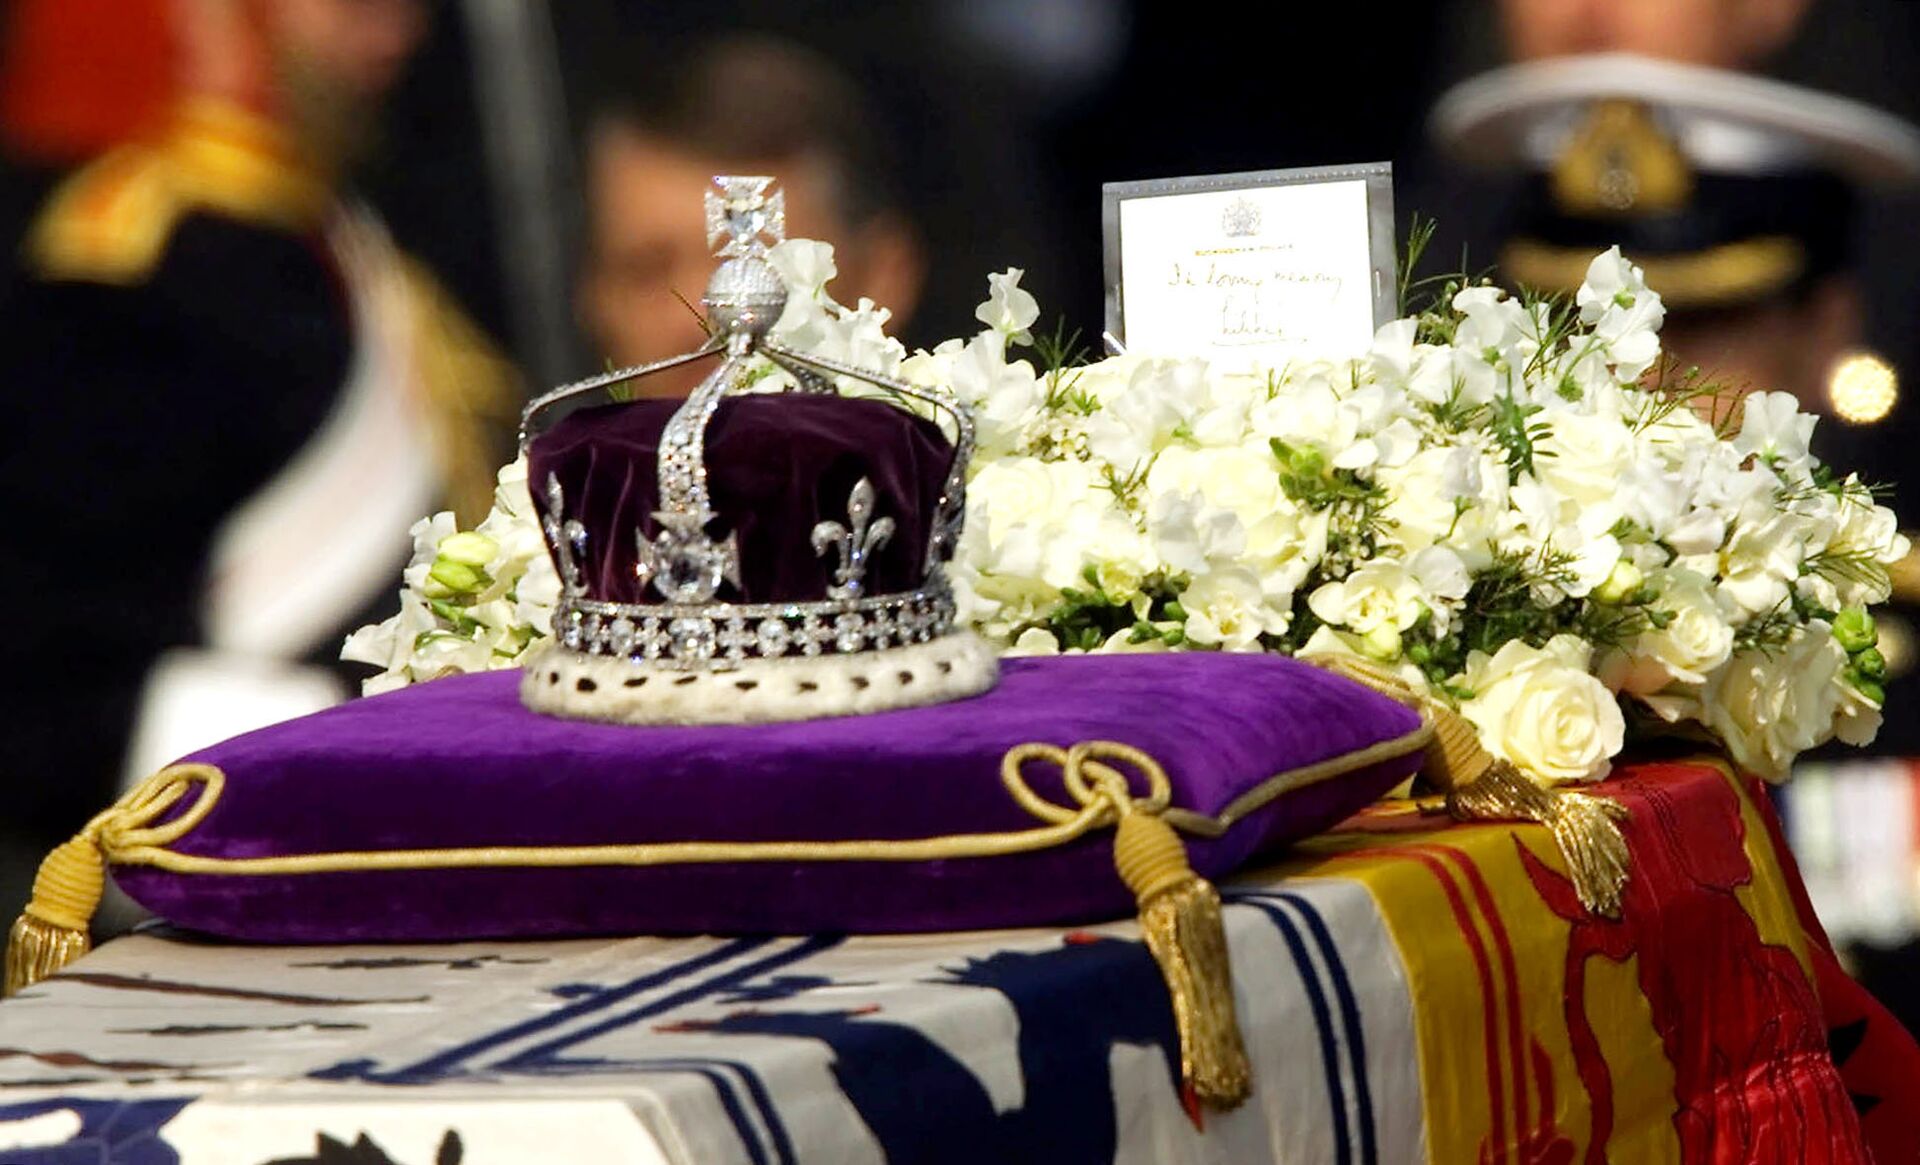 The Koh-i-noor, or mountain of light, diamond, set in the Maltese Cross at the front of the crown made for Britain's late Queen Mother Elizabeth, is seen on her coffin, along with her personal standard, a wreath and a note from her daughter, Queen Elizabeth II, as it is drawn to London's Westminster Hall in this April 5, 2002 file photo. - Sputnik International, 1920, 09.09.2022